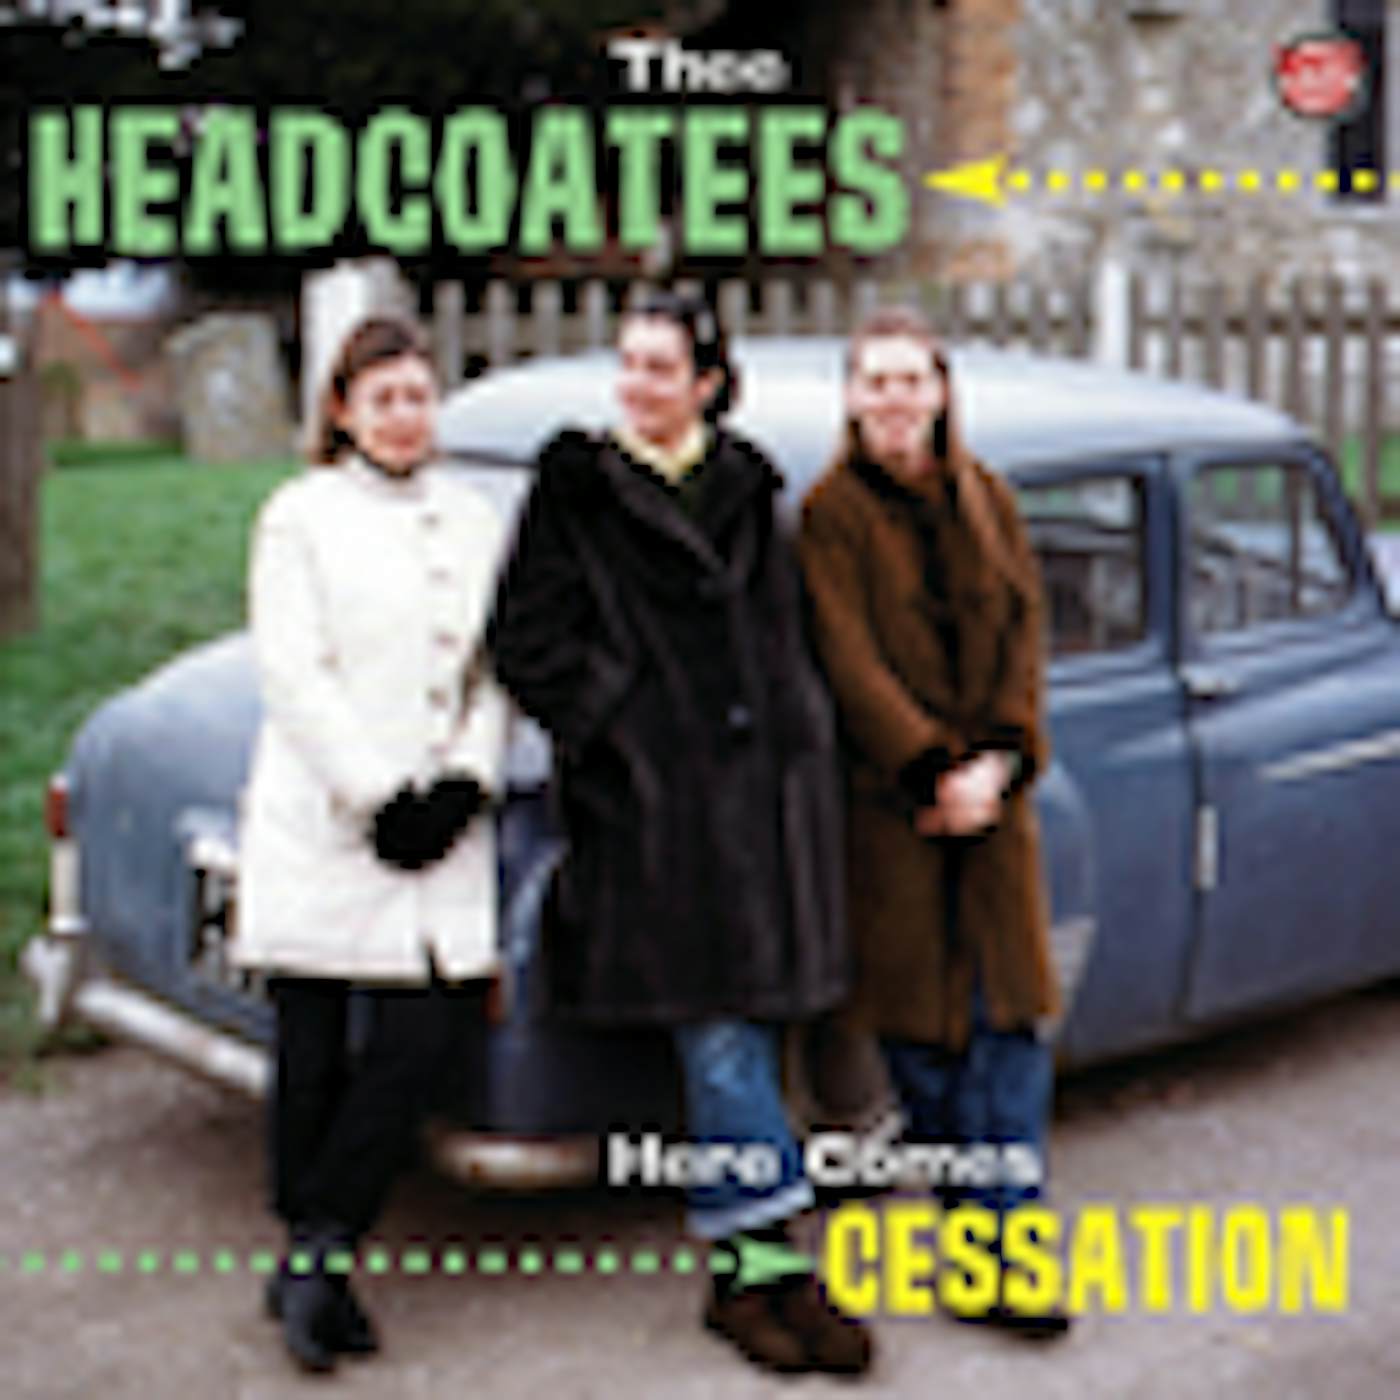 Thee Headcoatees HERE COMES CESSATION CD